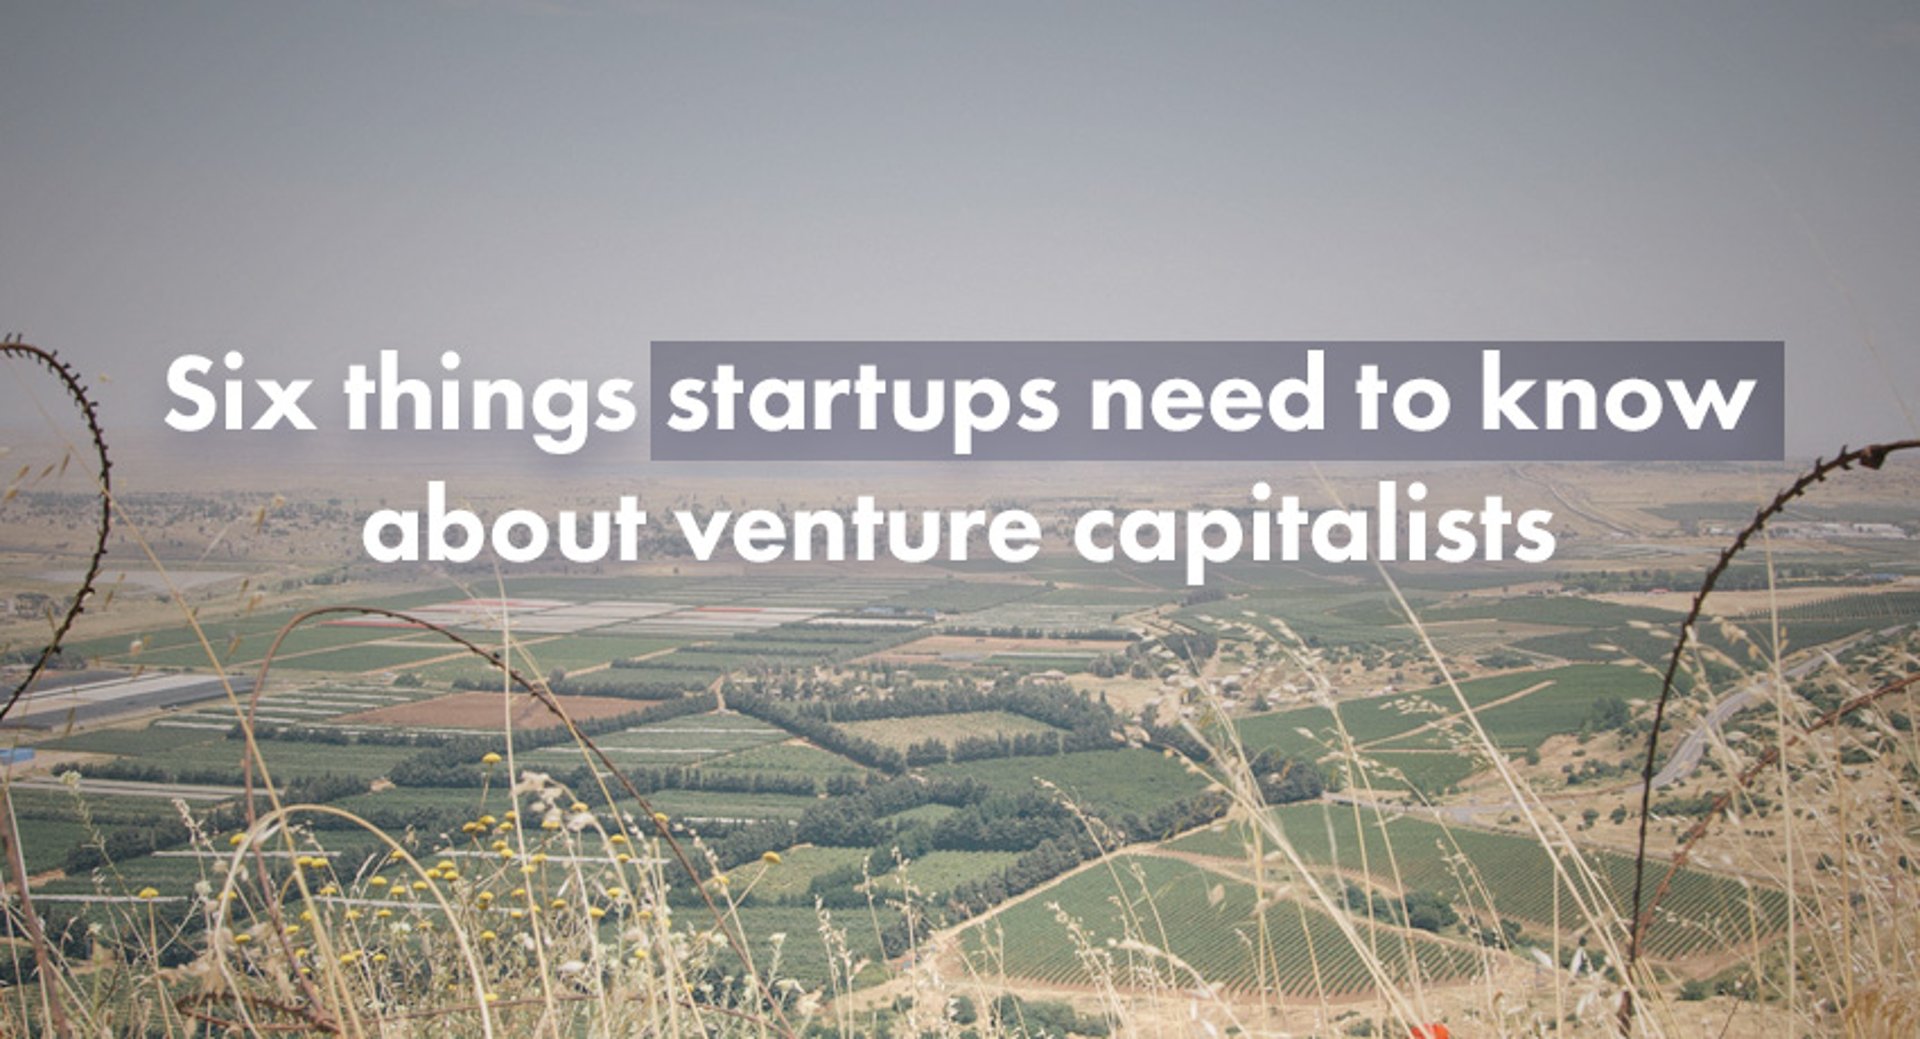 Banner 6 Things Startups Need to Know about Vcs